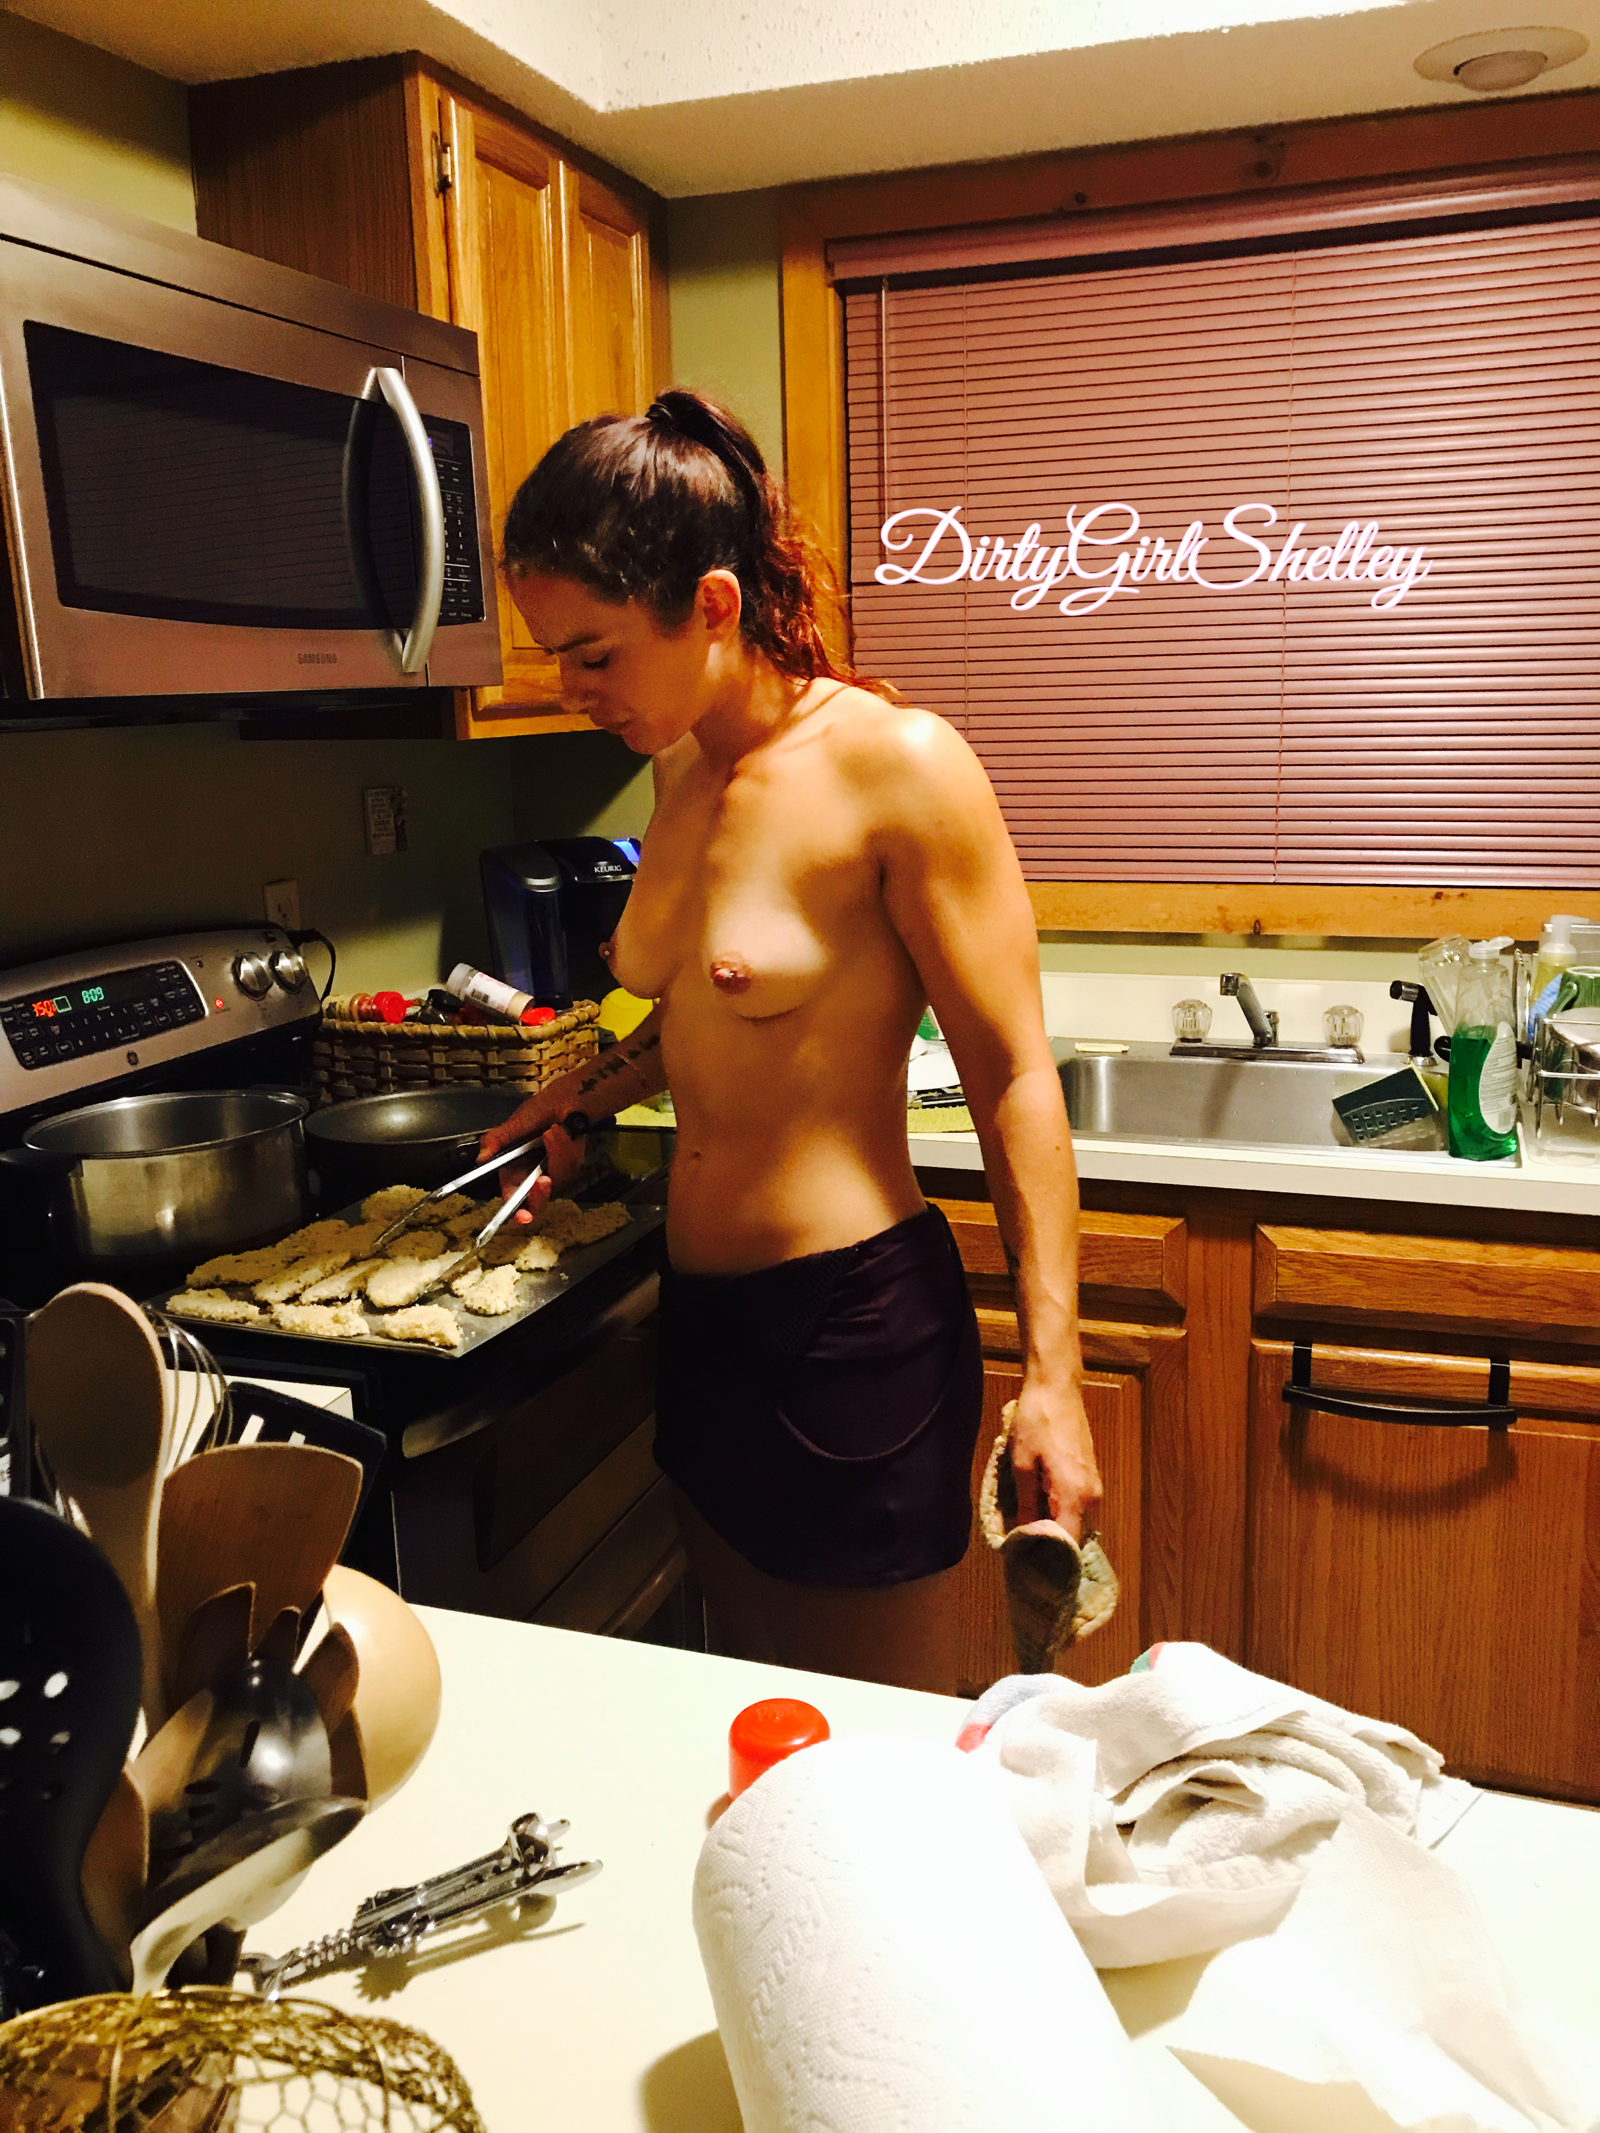 Photo by DirtyGirl Shelley with the username @dirtygirlshelley,  December 10, 2019 at 3:20 AM. The post is about the topic Women in the Kitchen and the text says 'Im a #Goodwife #hotwife! 
my baby loves the way I cook. 

its all breasts in this house🤣'